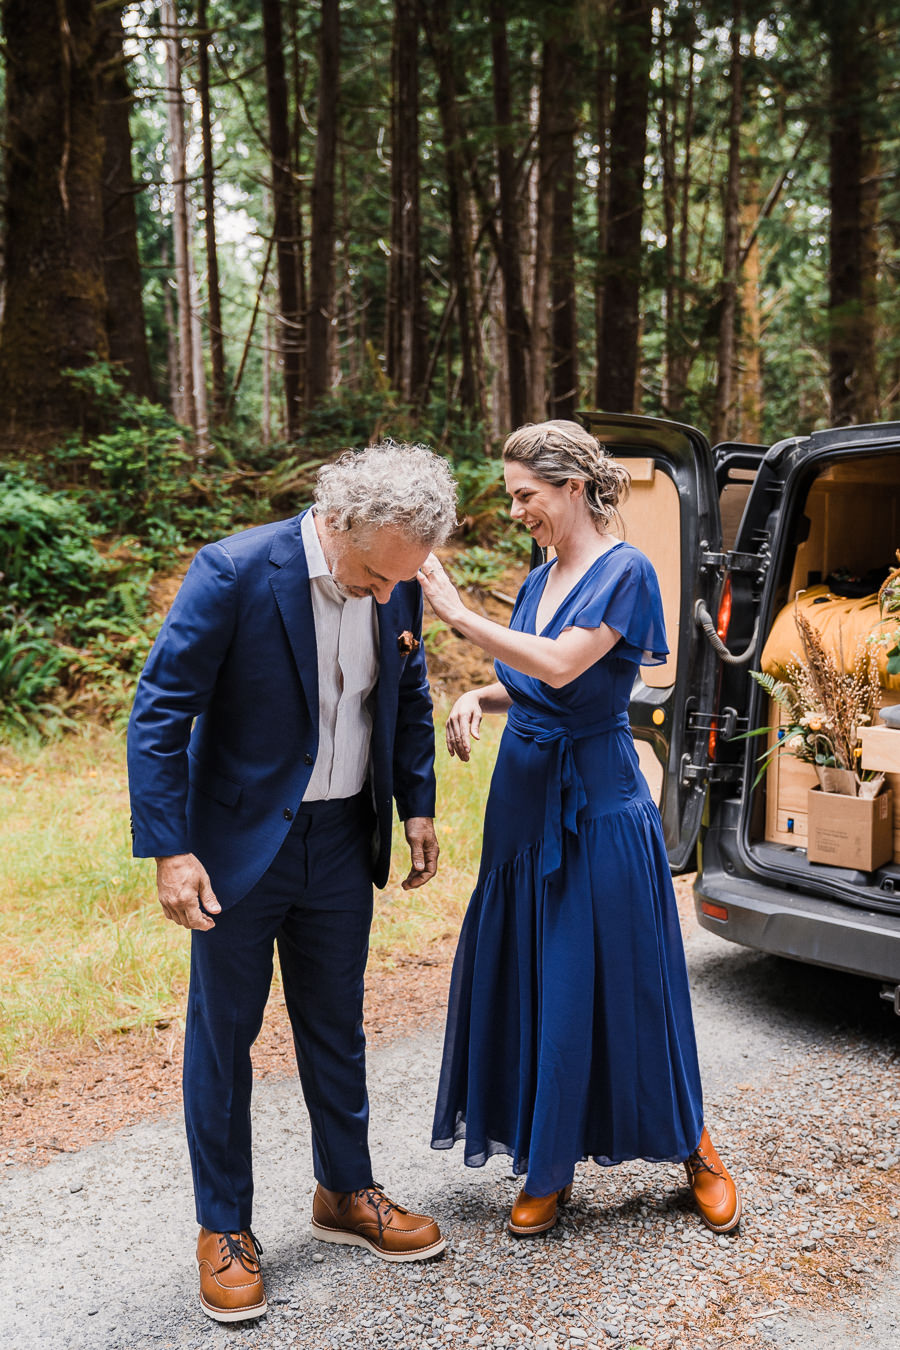 Bride helps her groom get ready for their elopement